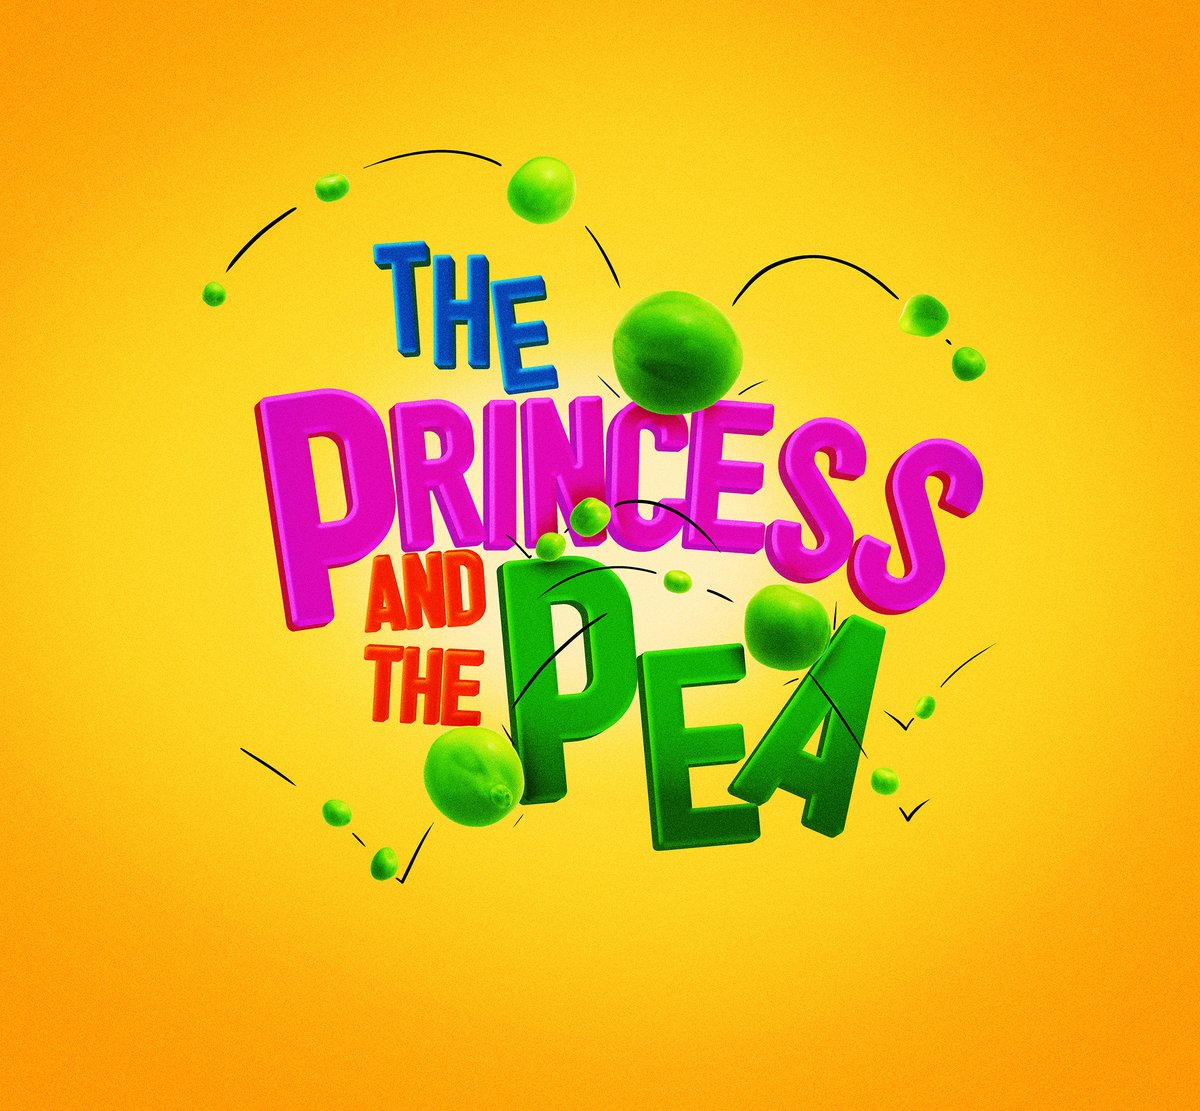 Rehearsals start today for our playful remix of the classic story #ThePrincessAndThePea! Our co-production with @Unicorn_Theatre & @upswingaerial will feature acrobatics, clowning and adventure. The next production as part of our programme fusing circus with theatre, we can’t